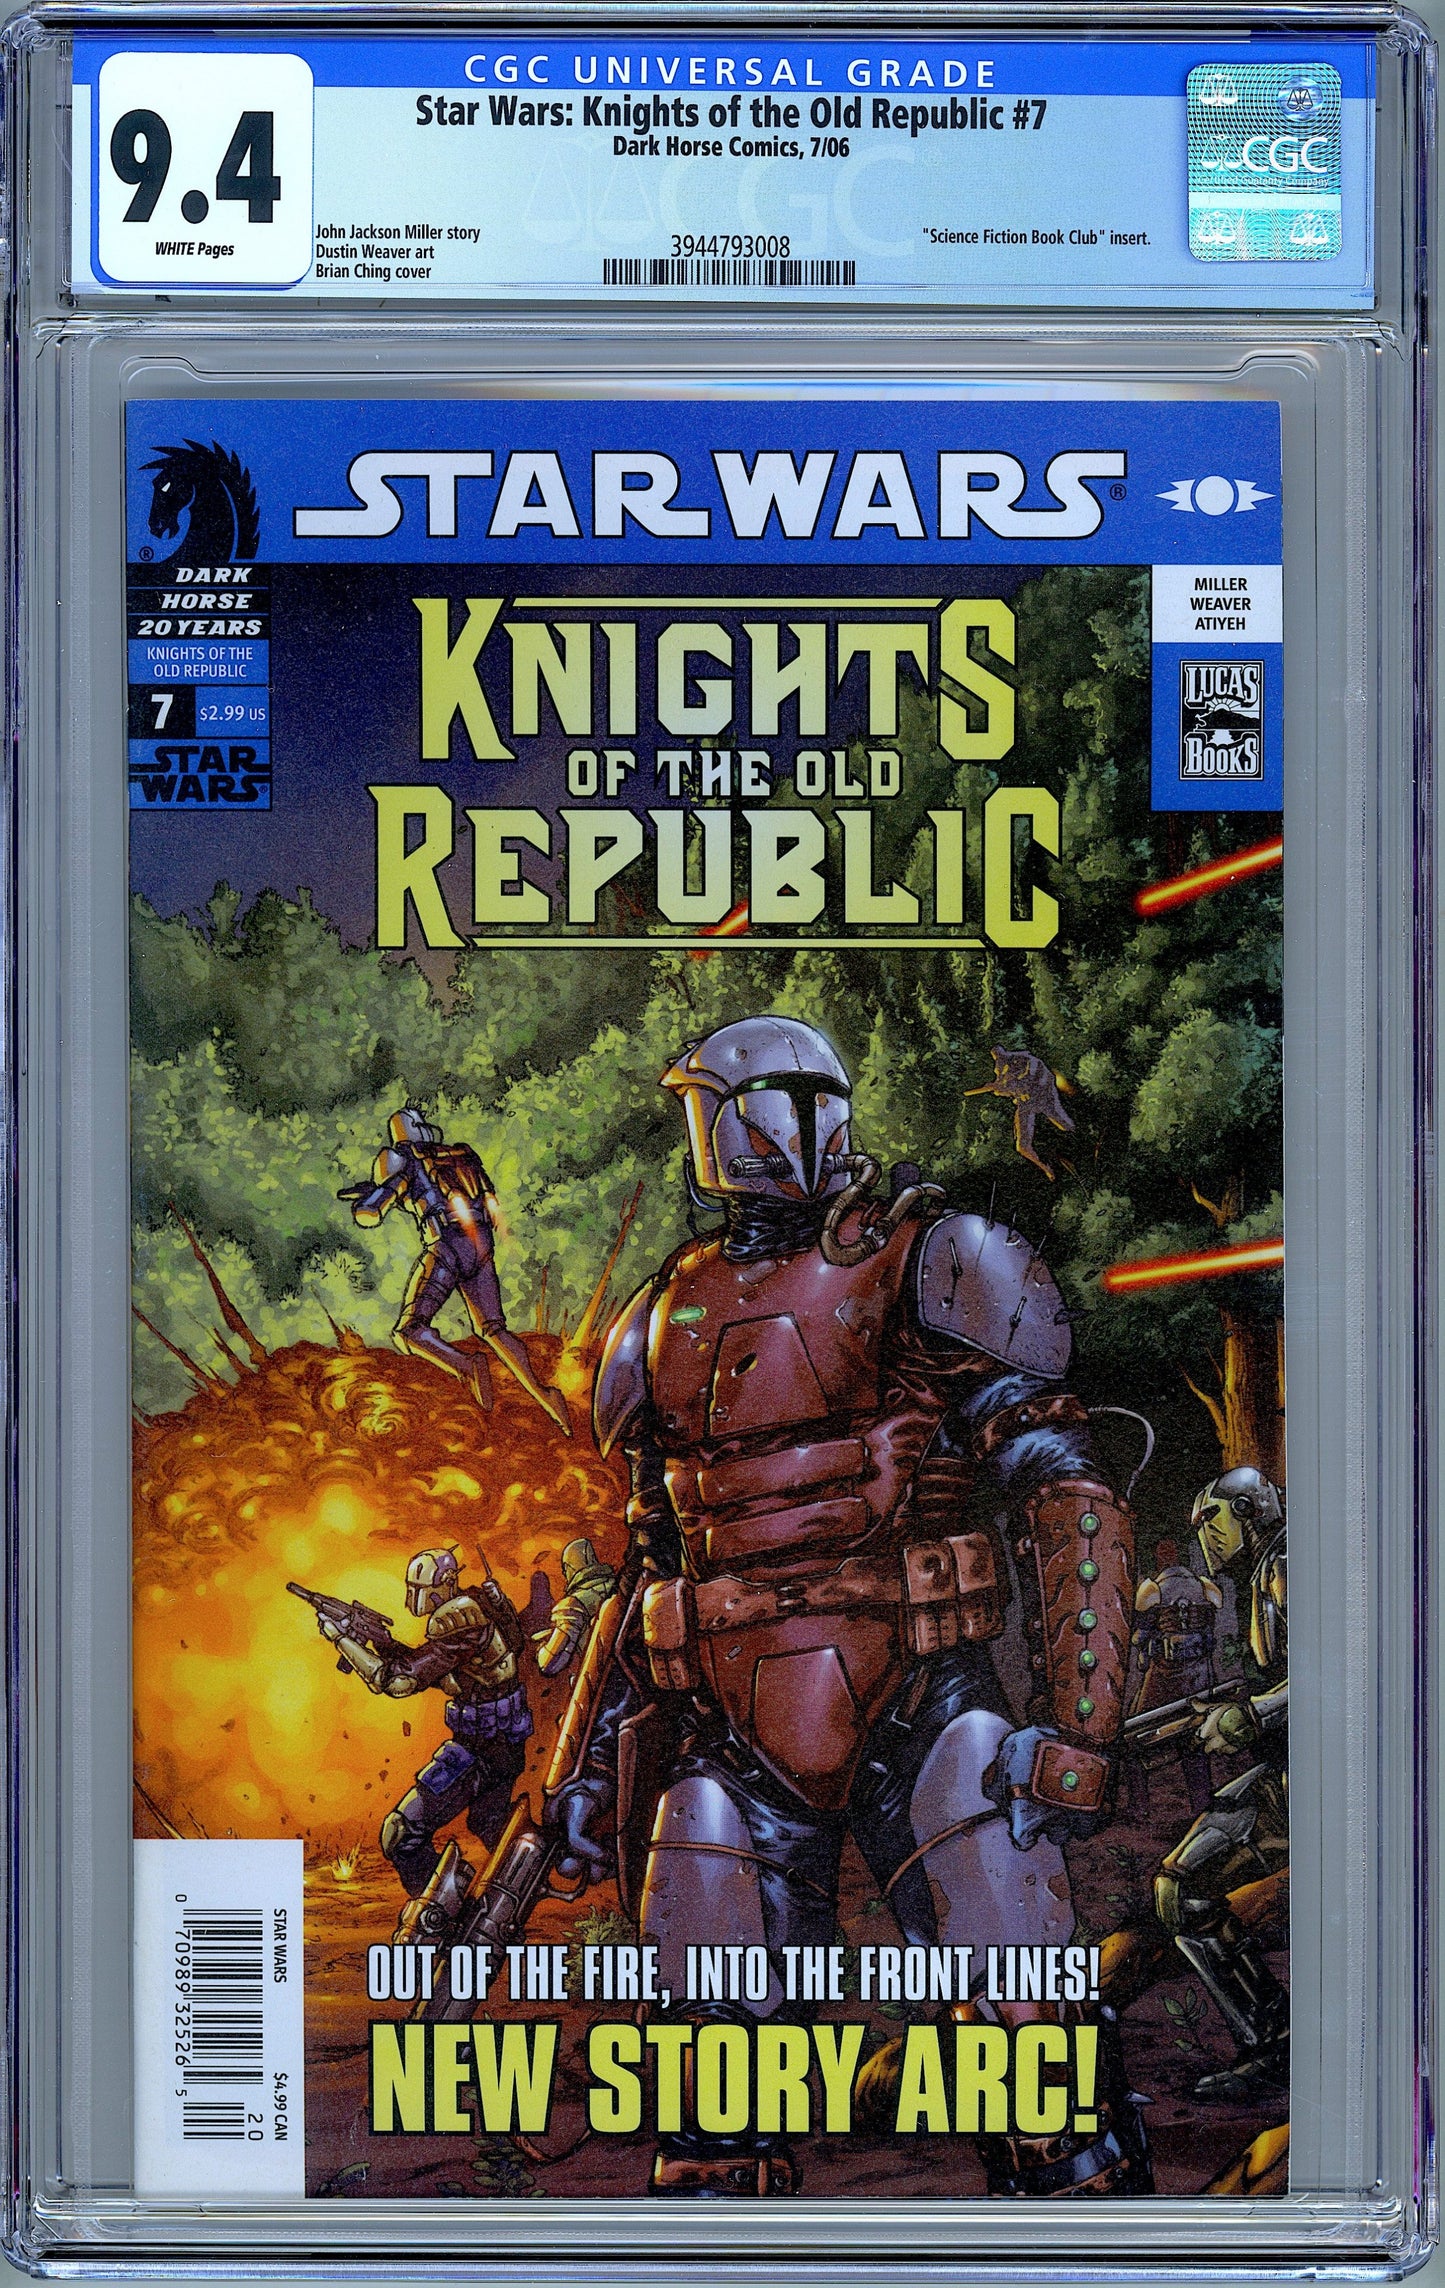 Star Wars: Knights of the Old Republic #7 2006 CGC 9.4